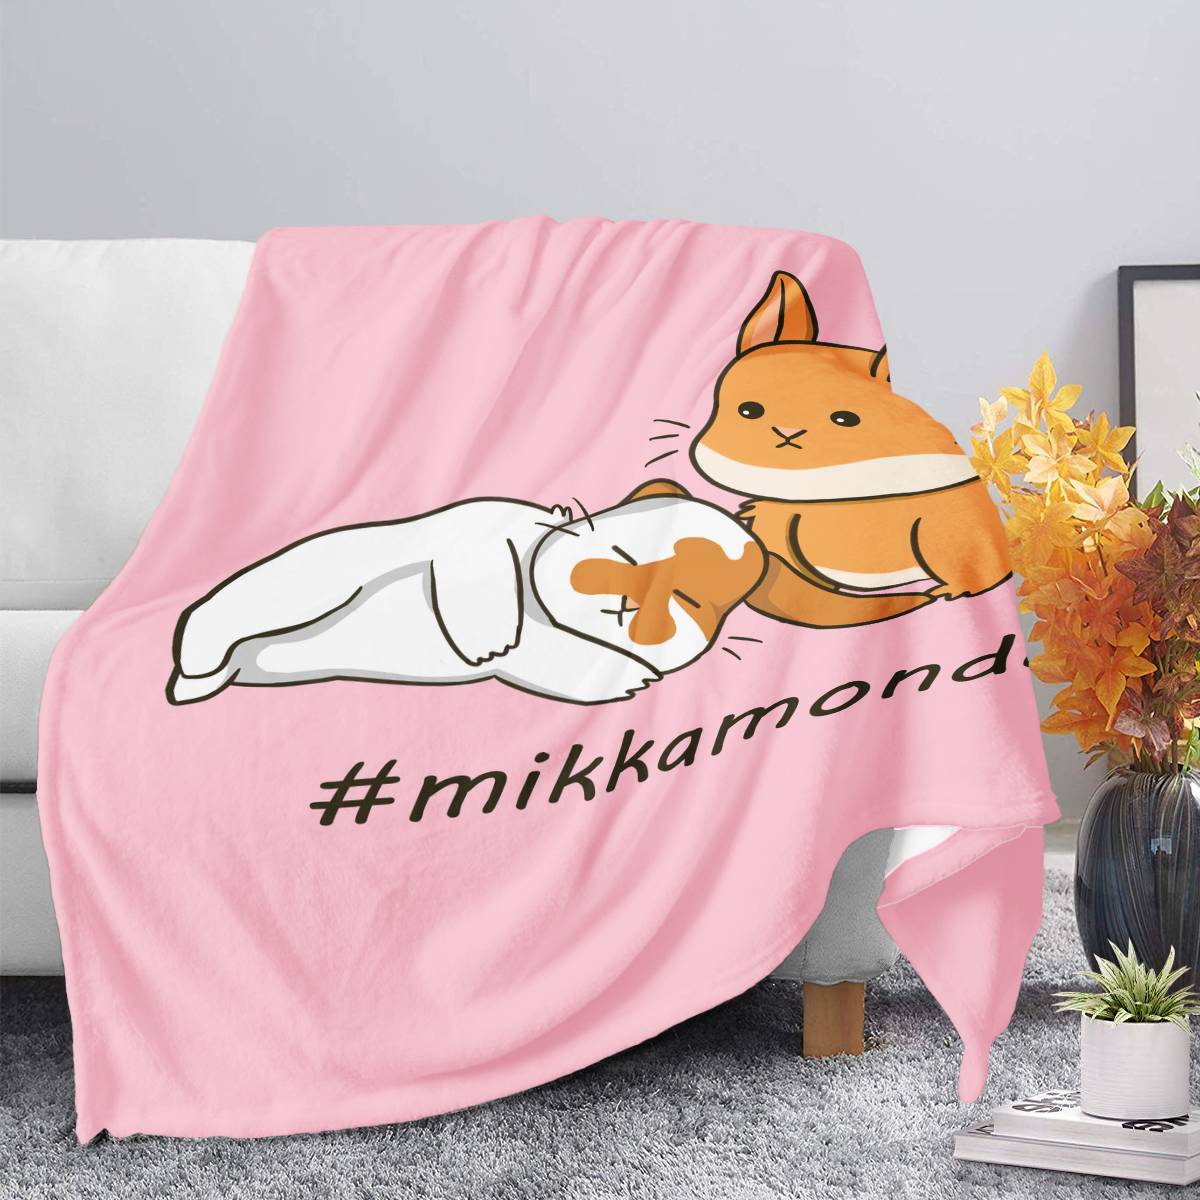 Zucca and Mikka #mikkamonday Limited Edition Blankets